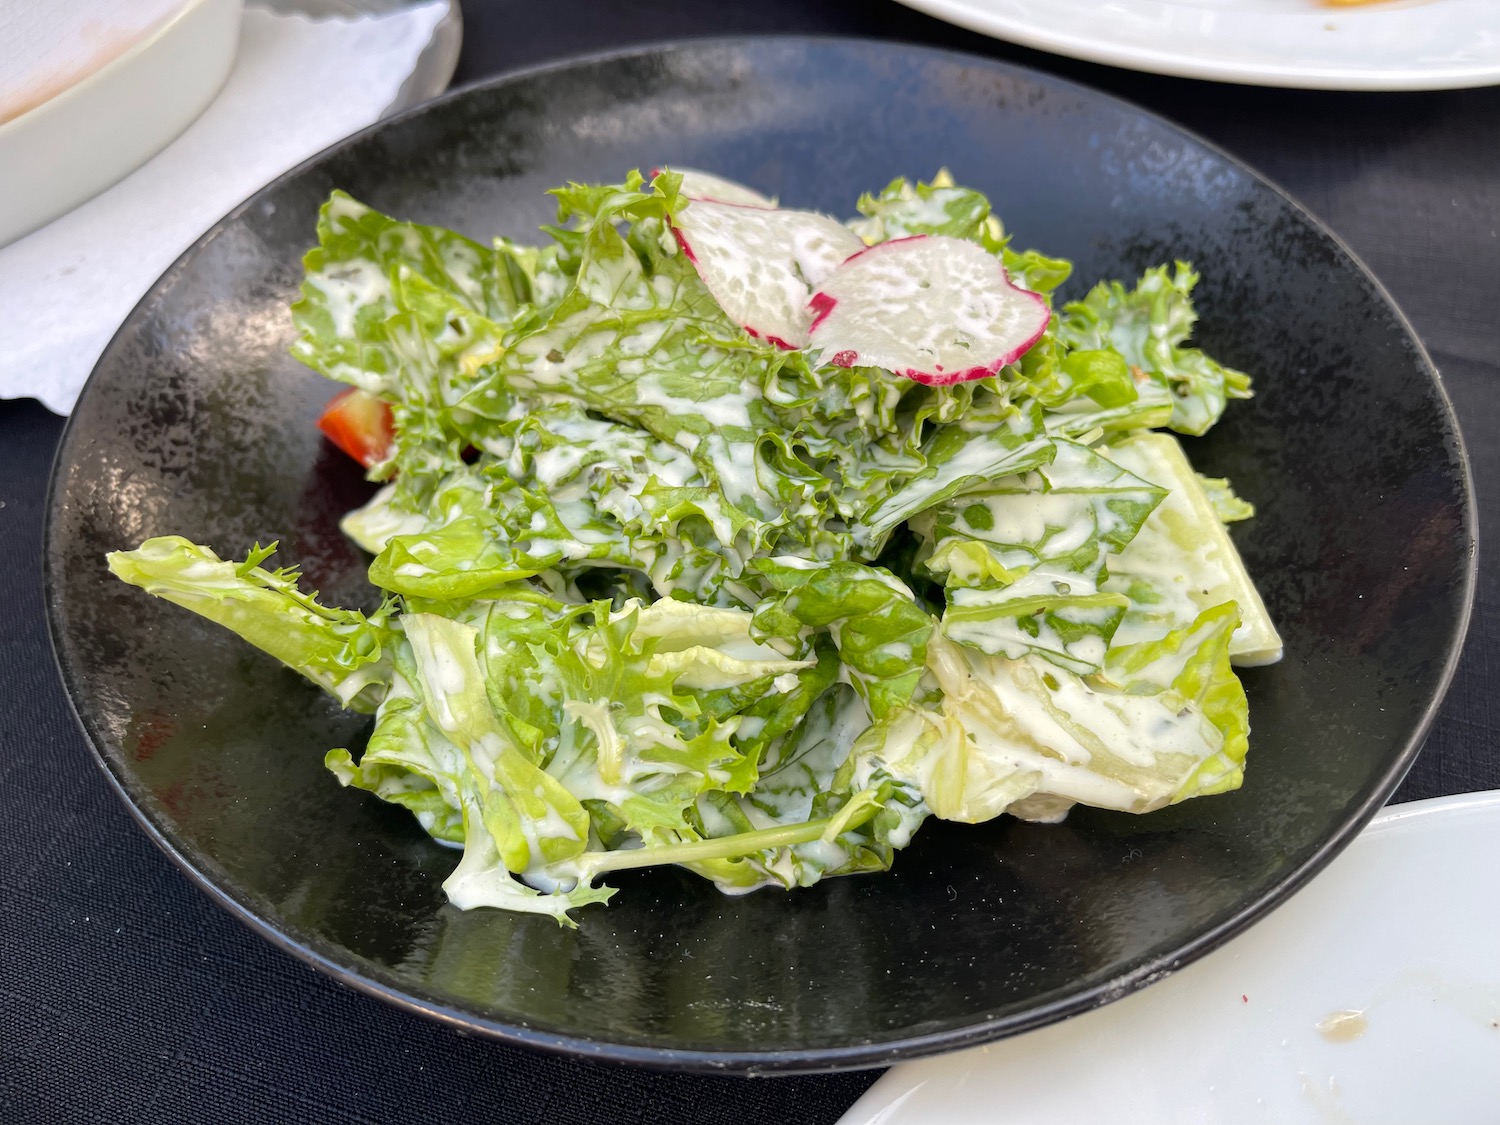 a plate of salad with a white sauce